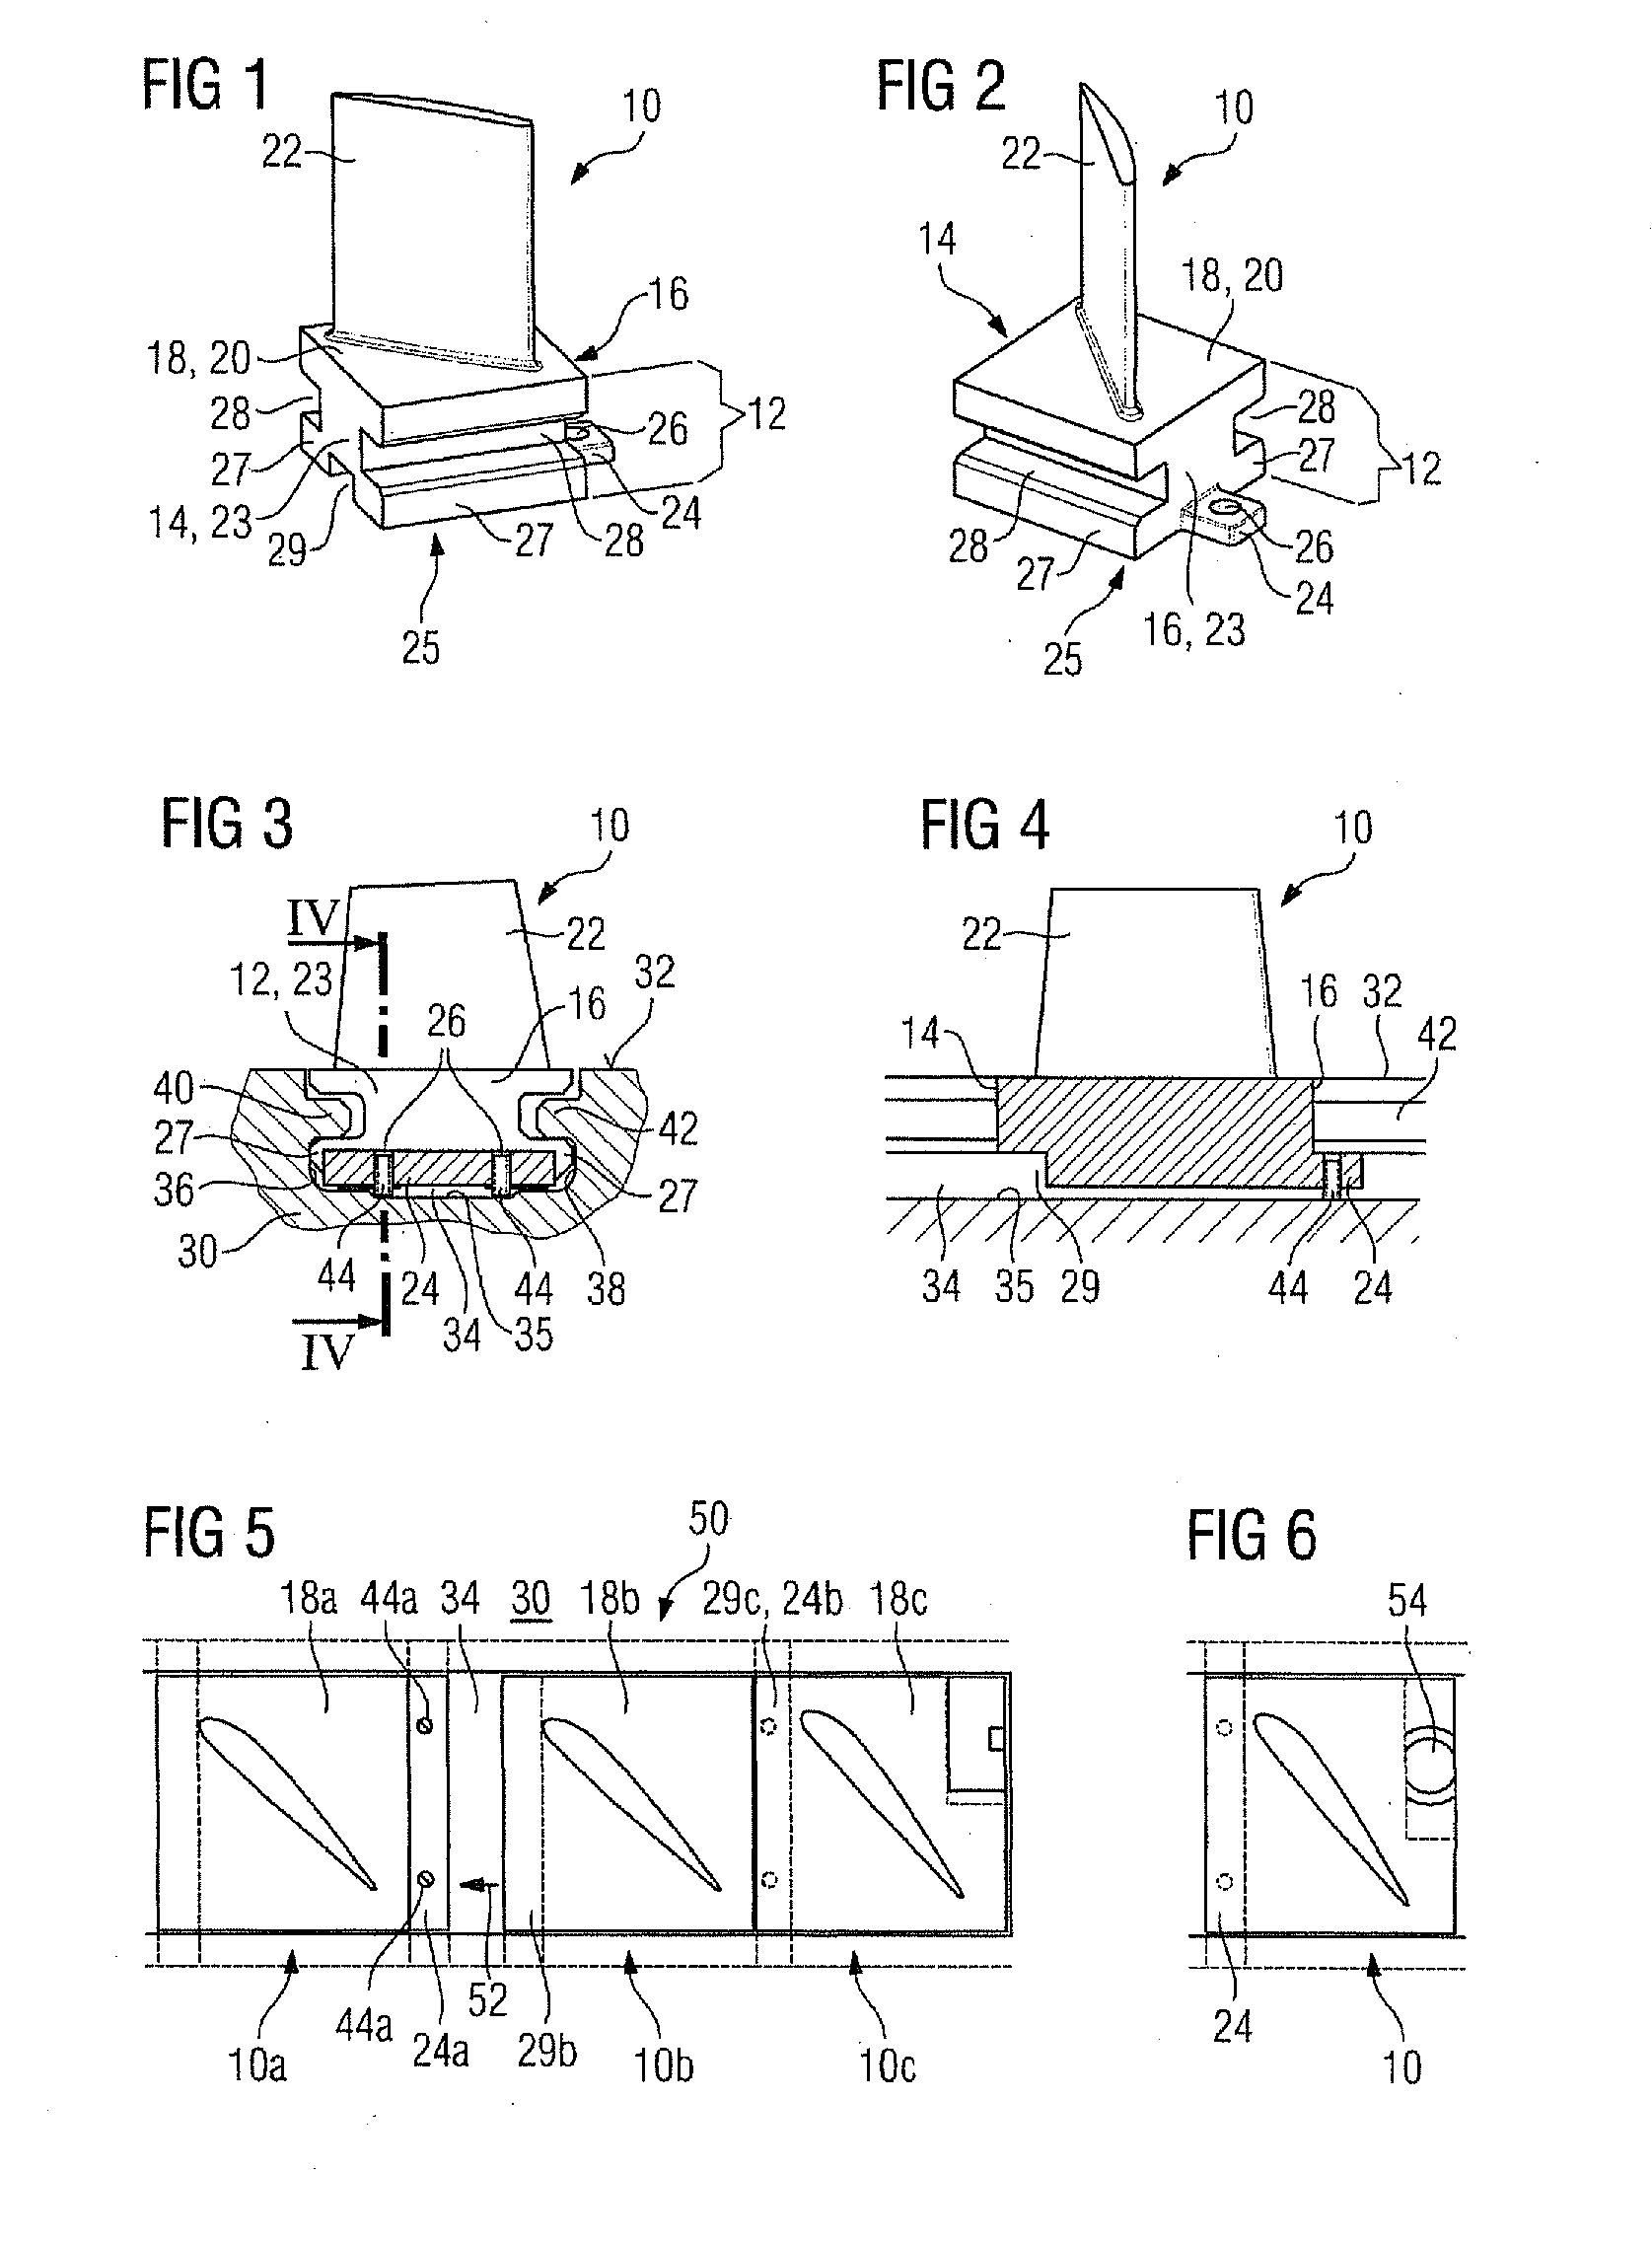 Stator Blade for a Turbomachine which is Exposable to Axial Throughflow, and also Stator Blade Arrangement for It